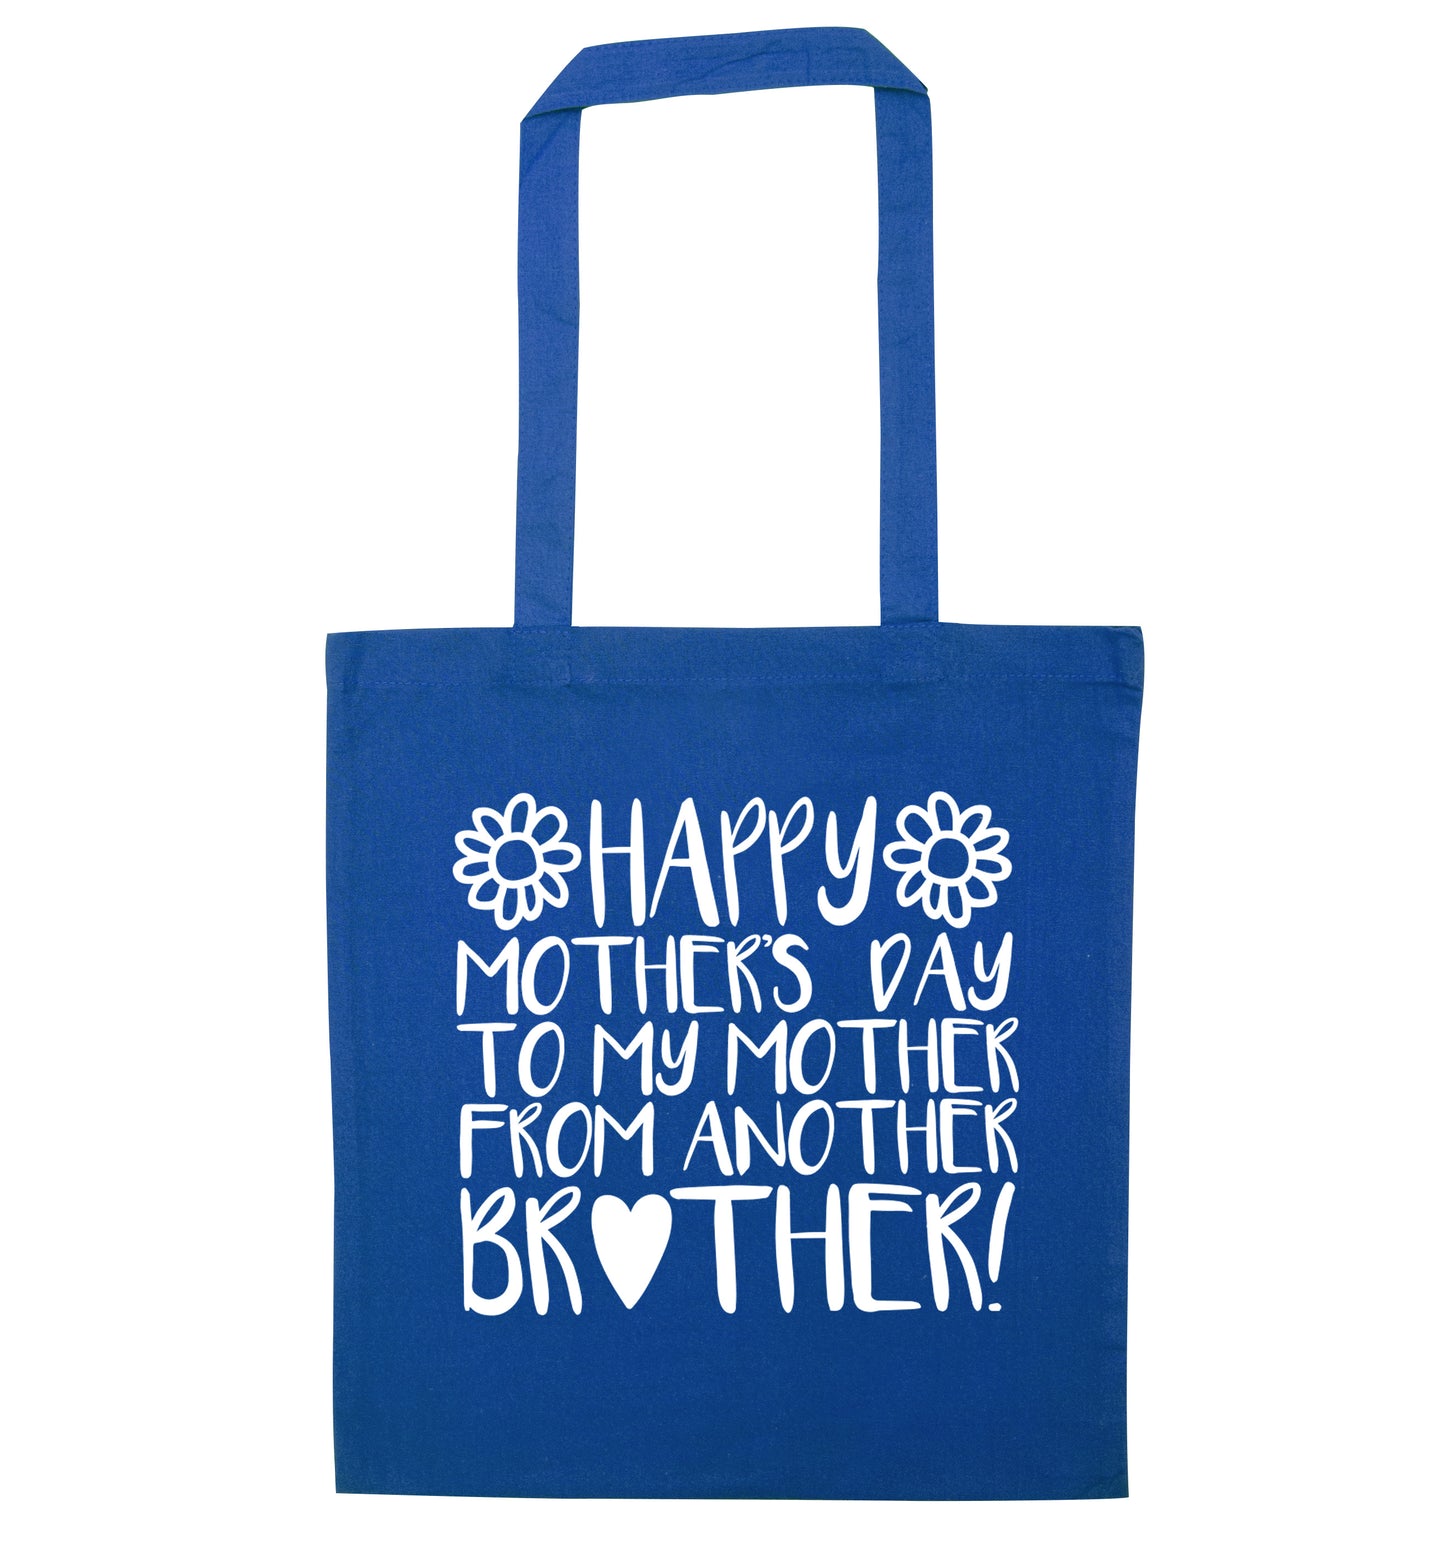 Happy mother's day to my mother from another brother blue tote bag